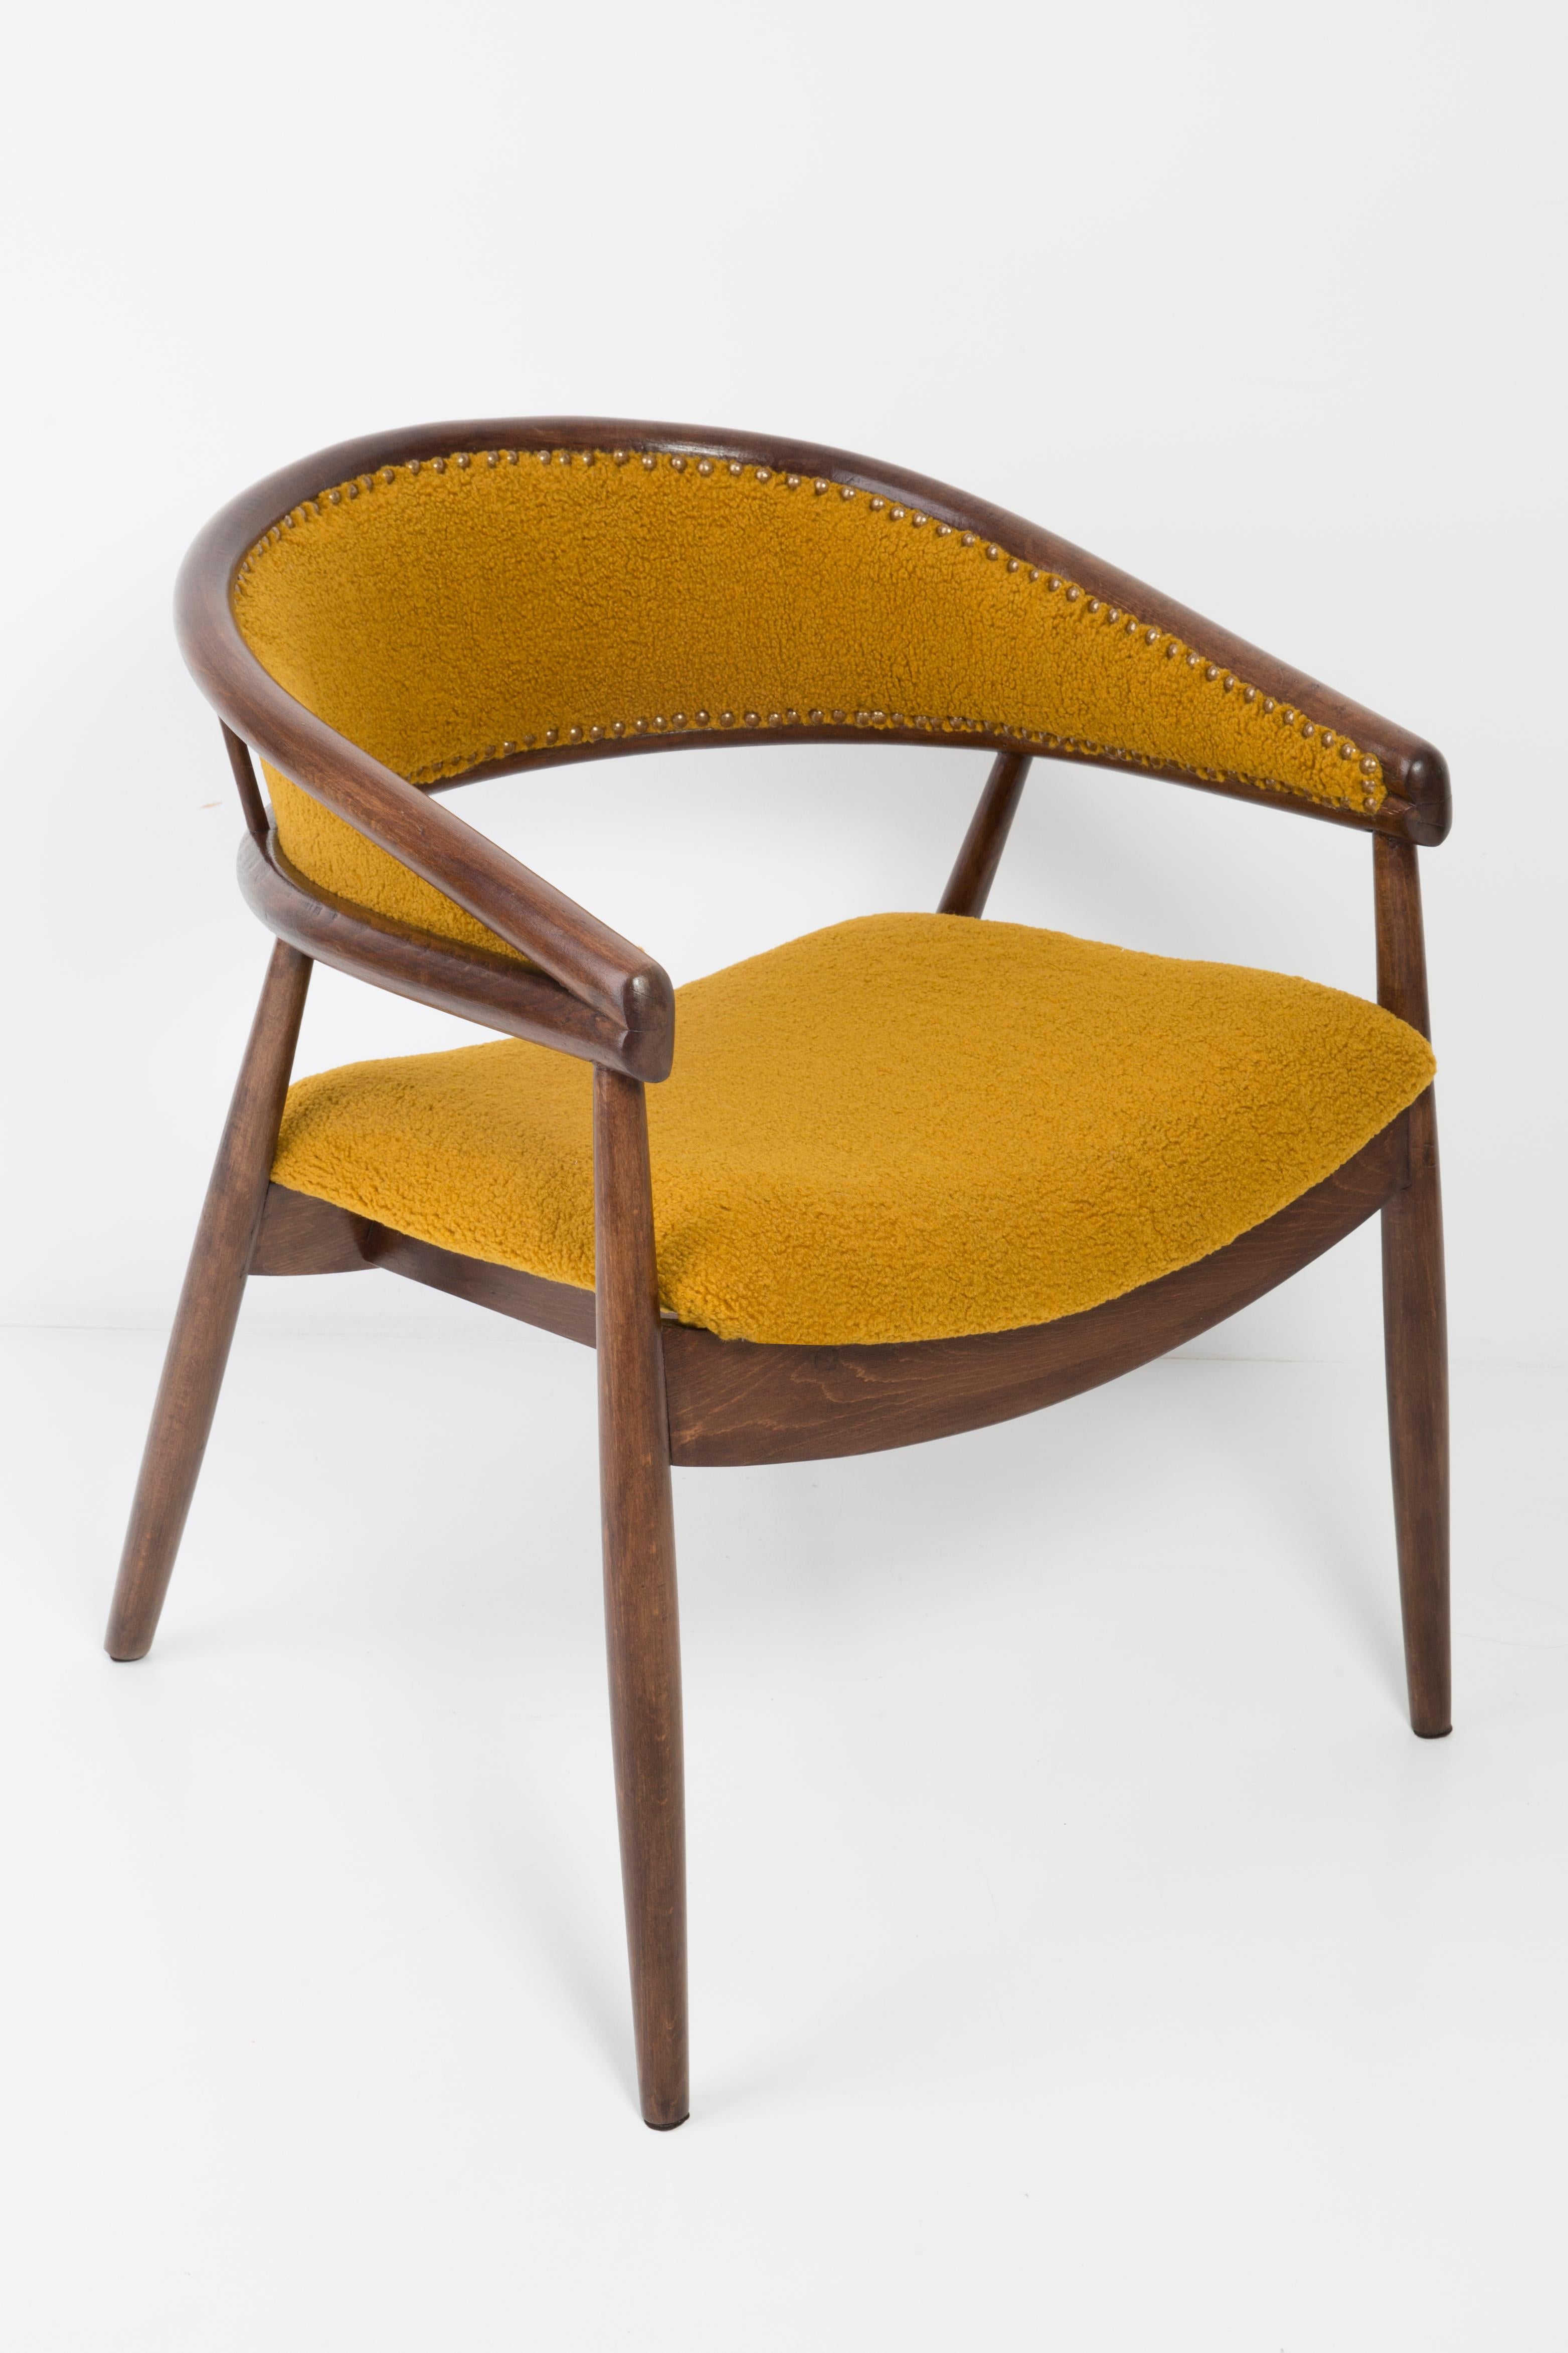 20th Century Set of Two James Mont Bent Beech Armchairs, Yellow Ochra Boucle, 1960s For Sale